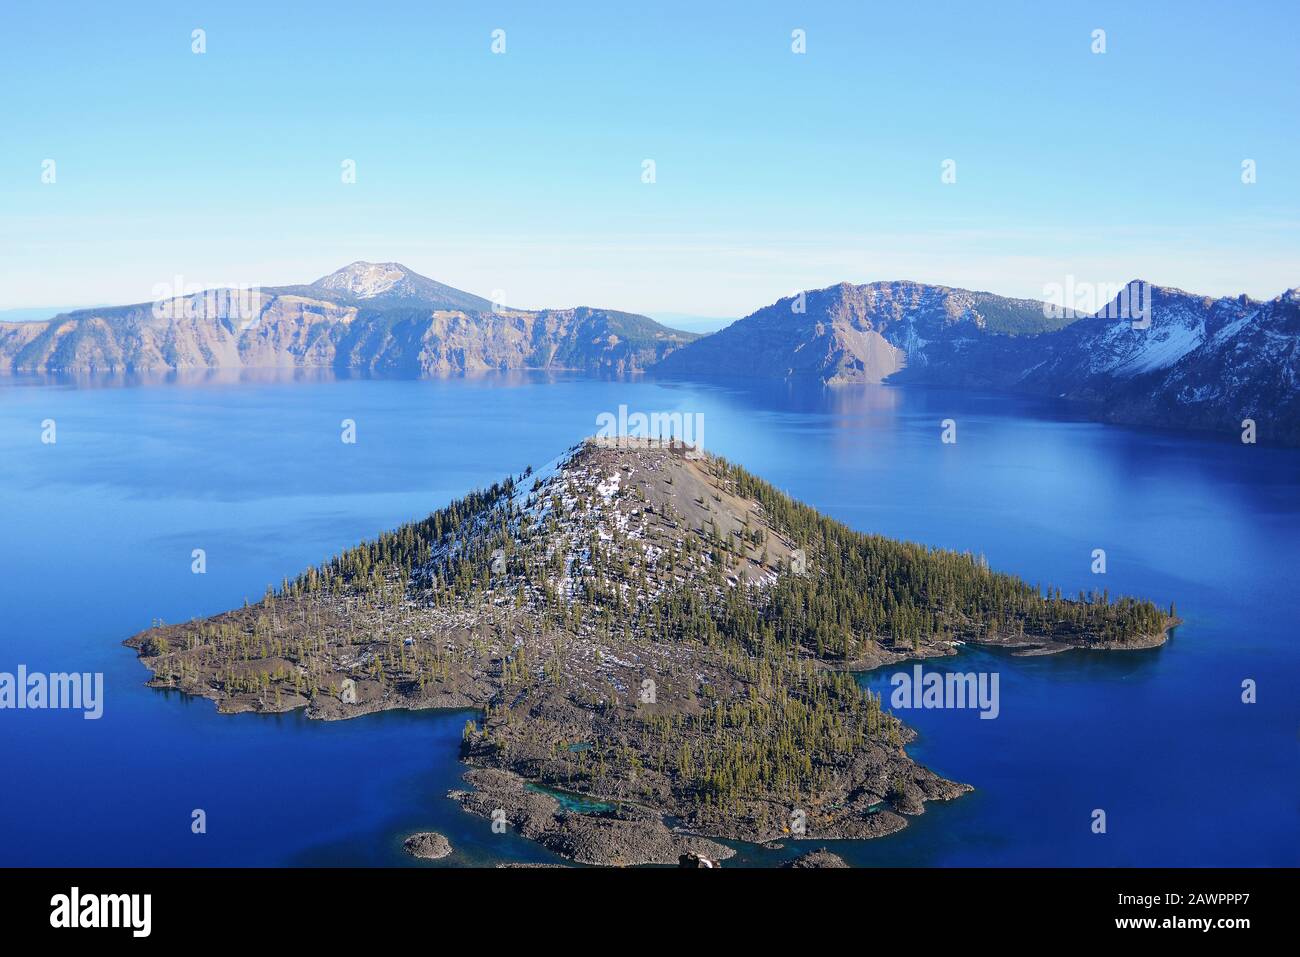 Crater Lake National Park, Wizard Island, Snow, Park In Inverno Foto Stock